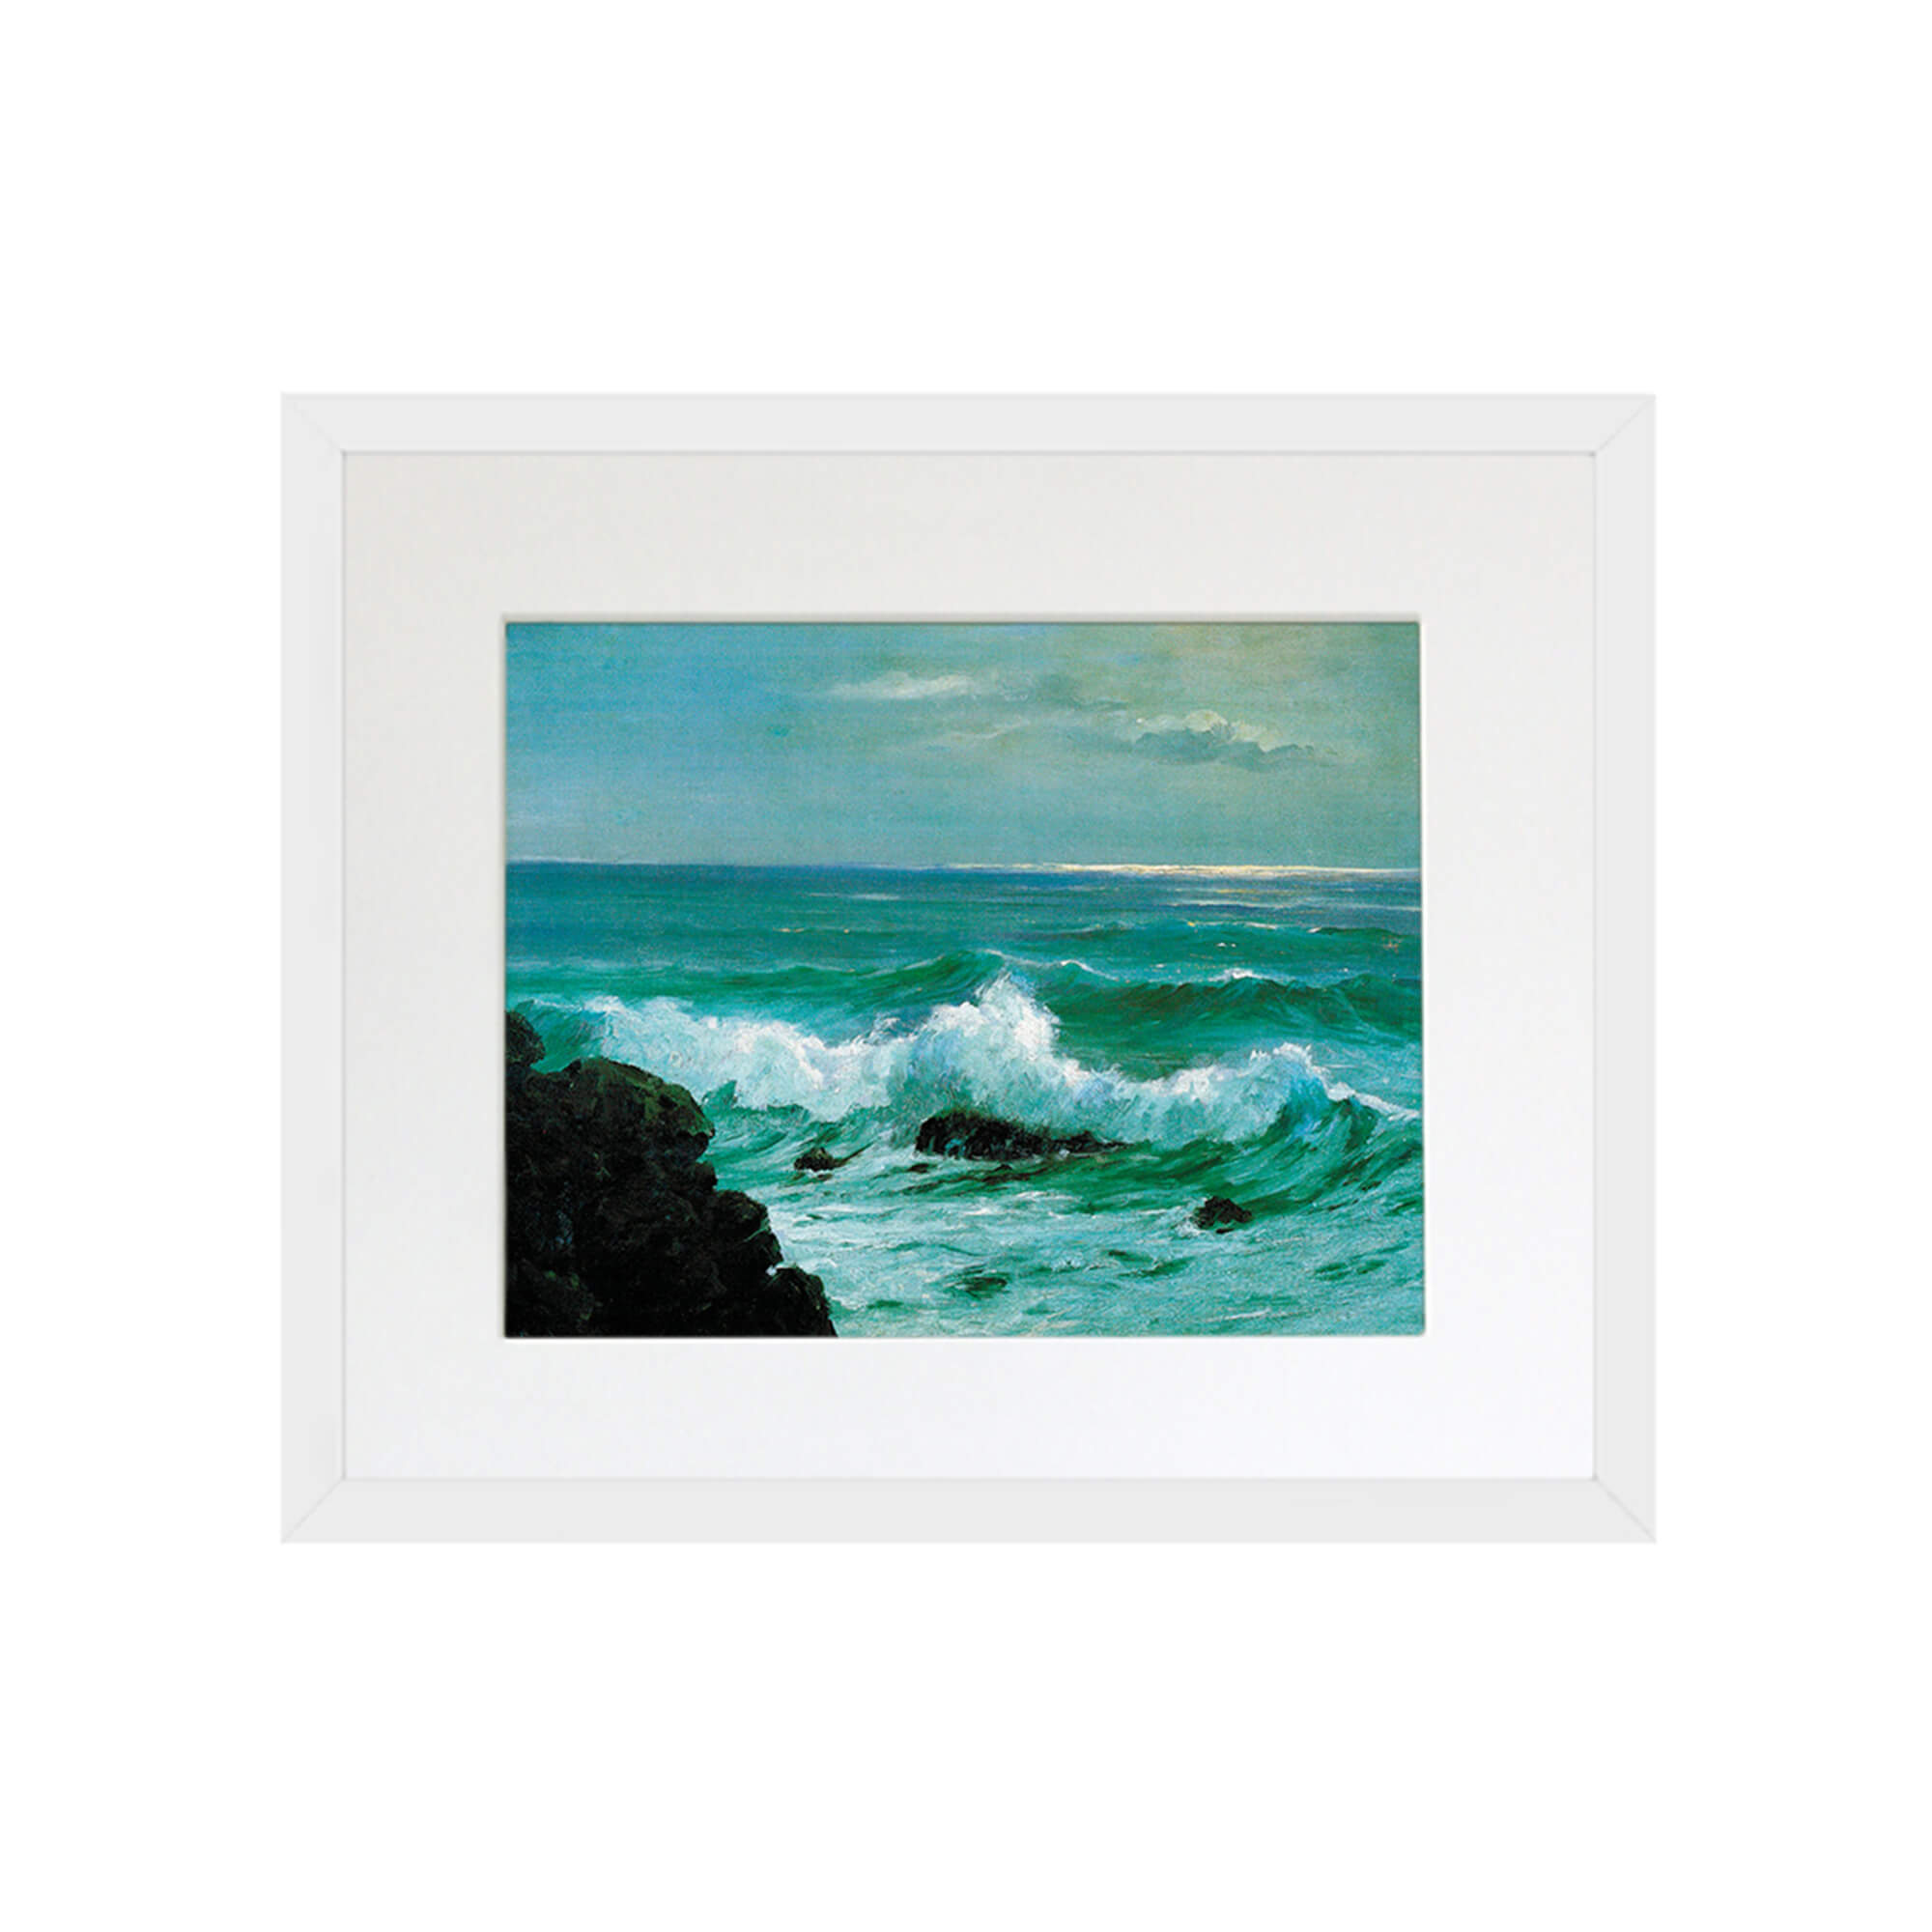 Teal-hued seascape of a vintage painting